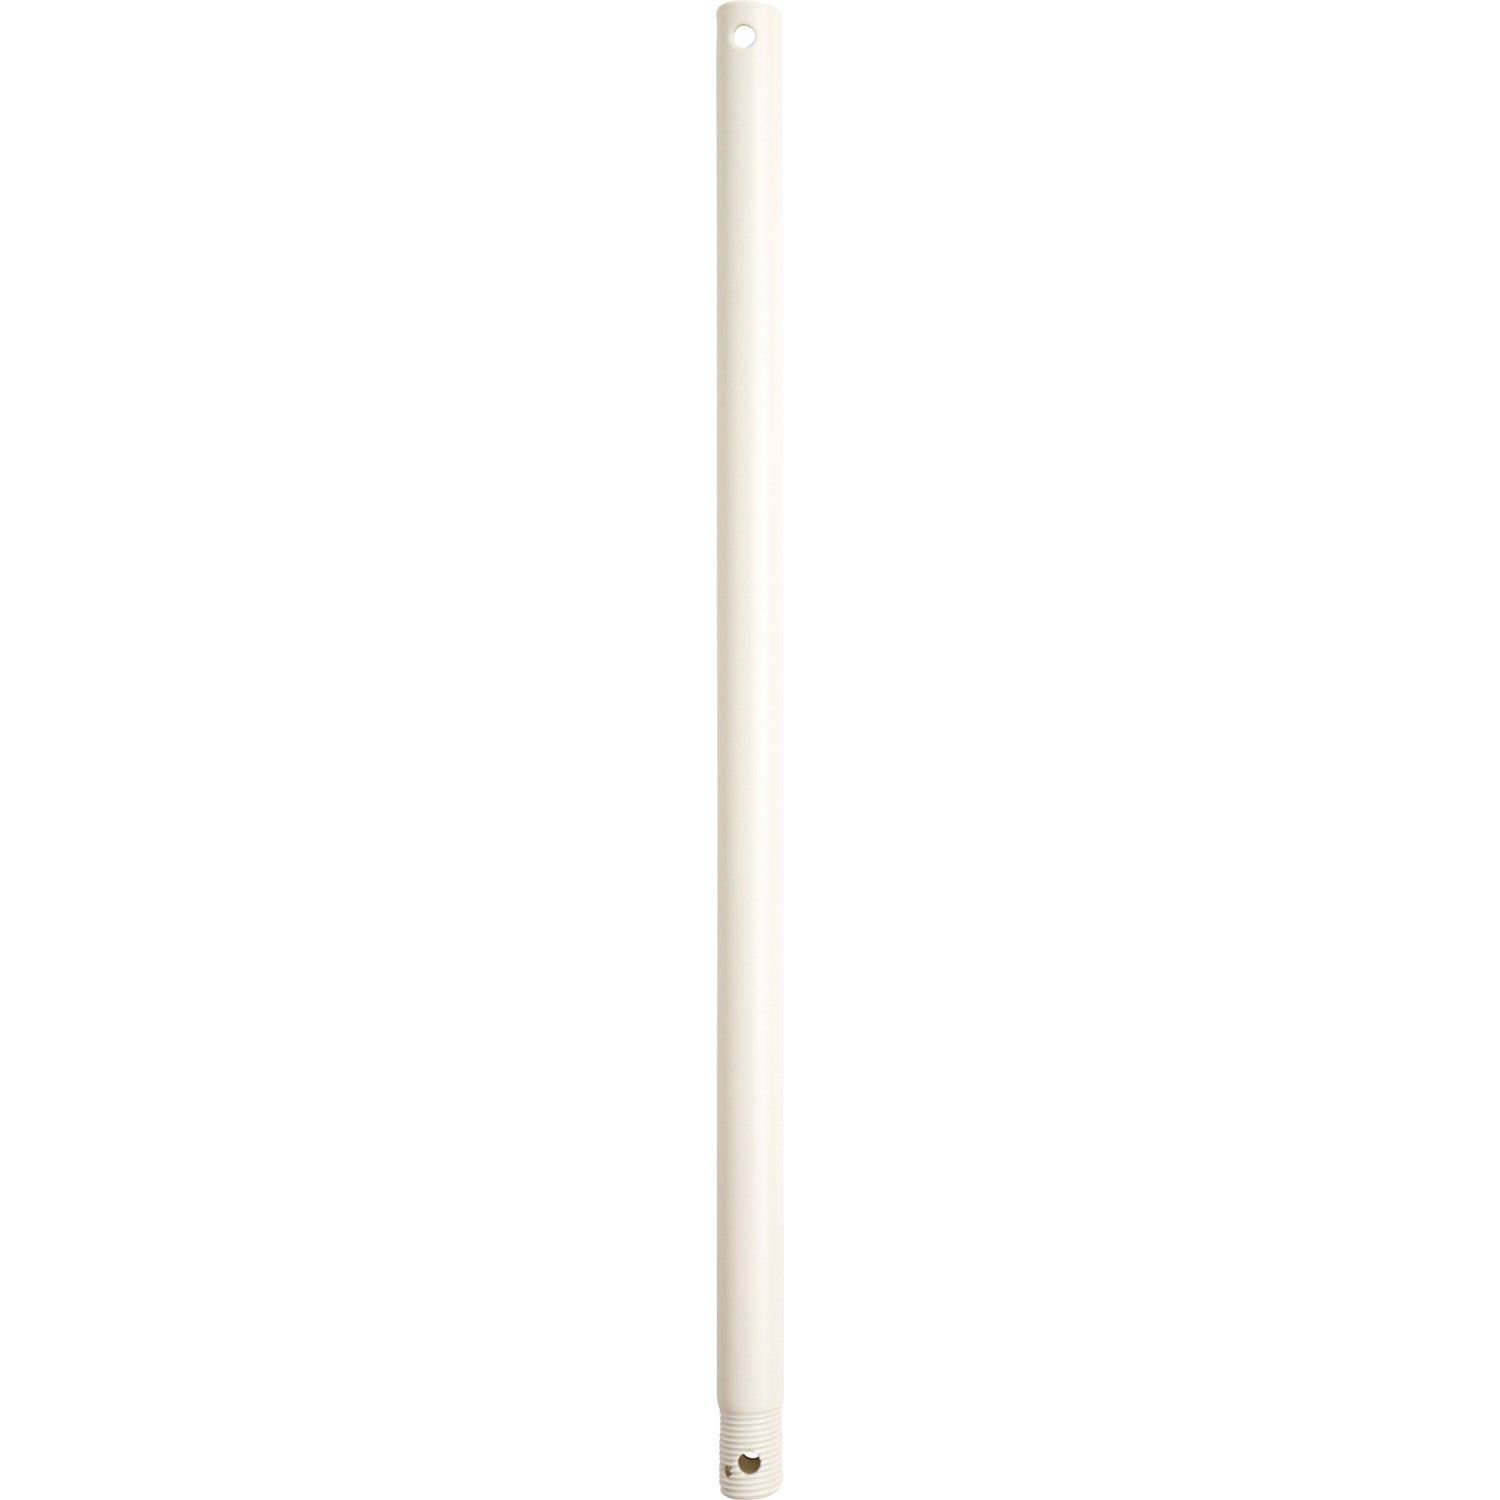 Quorum - 6-1867 - Downrod - 18 in. Downrods - Antique White